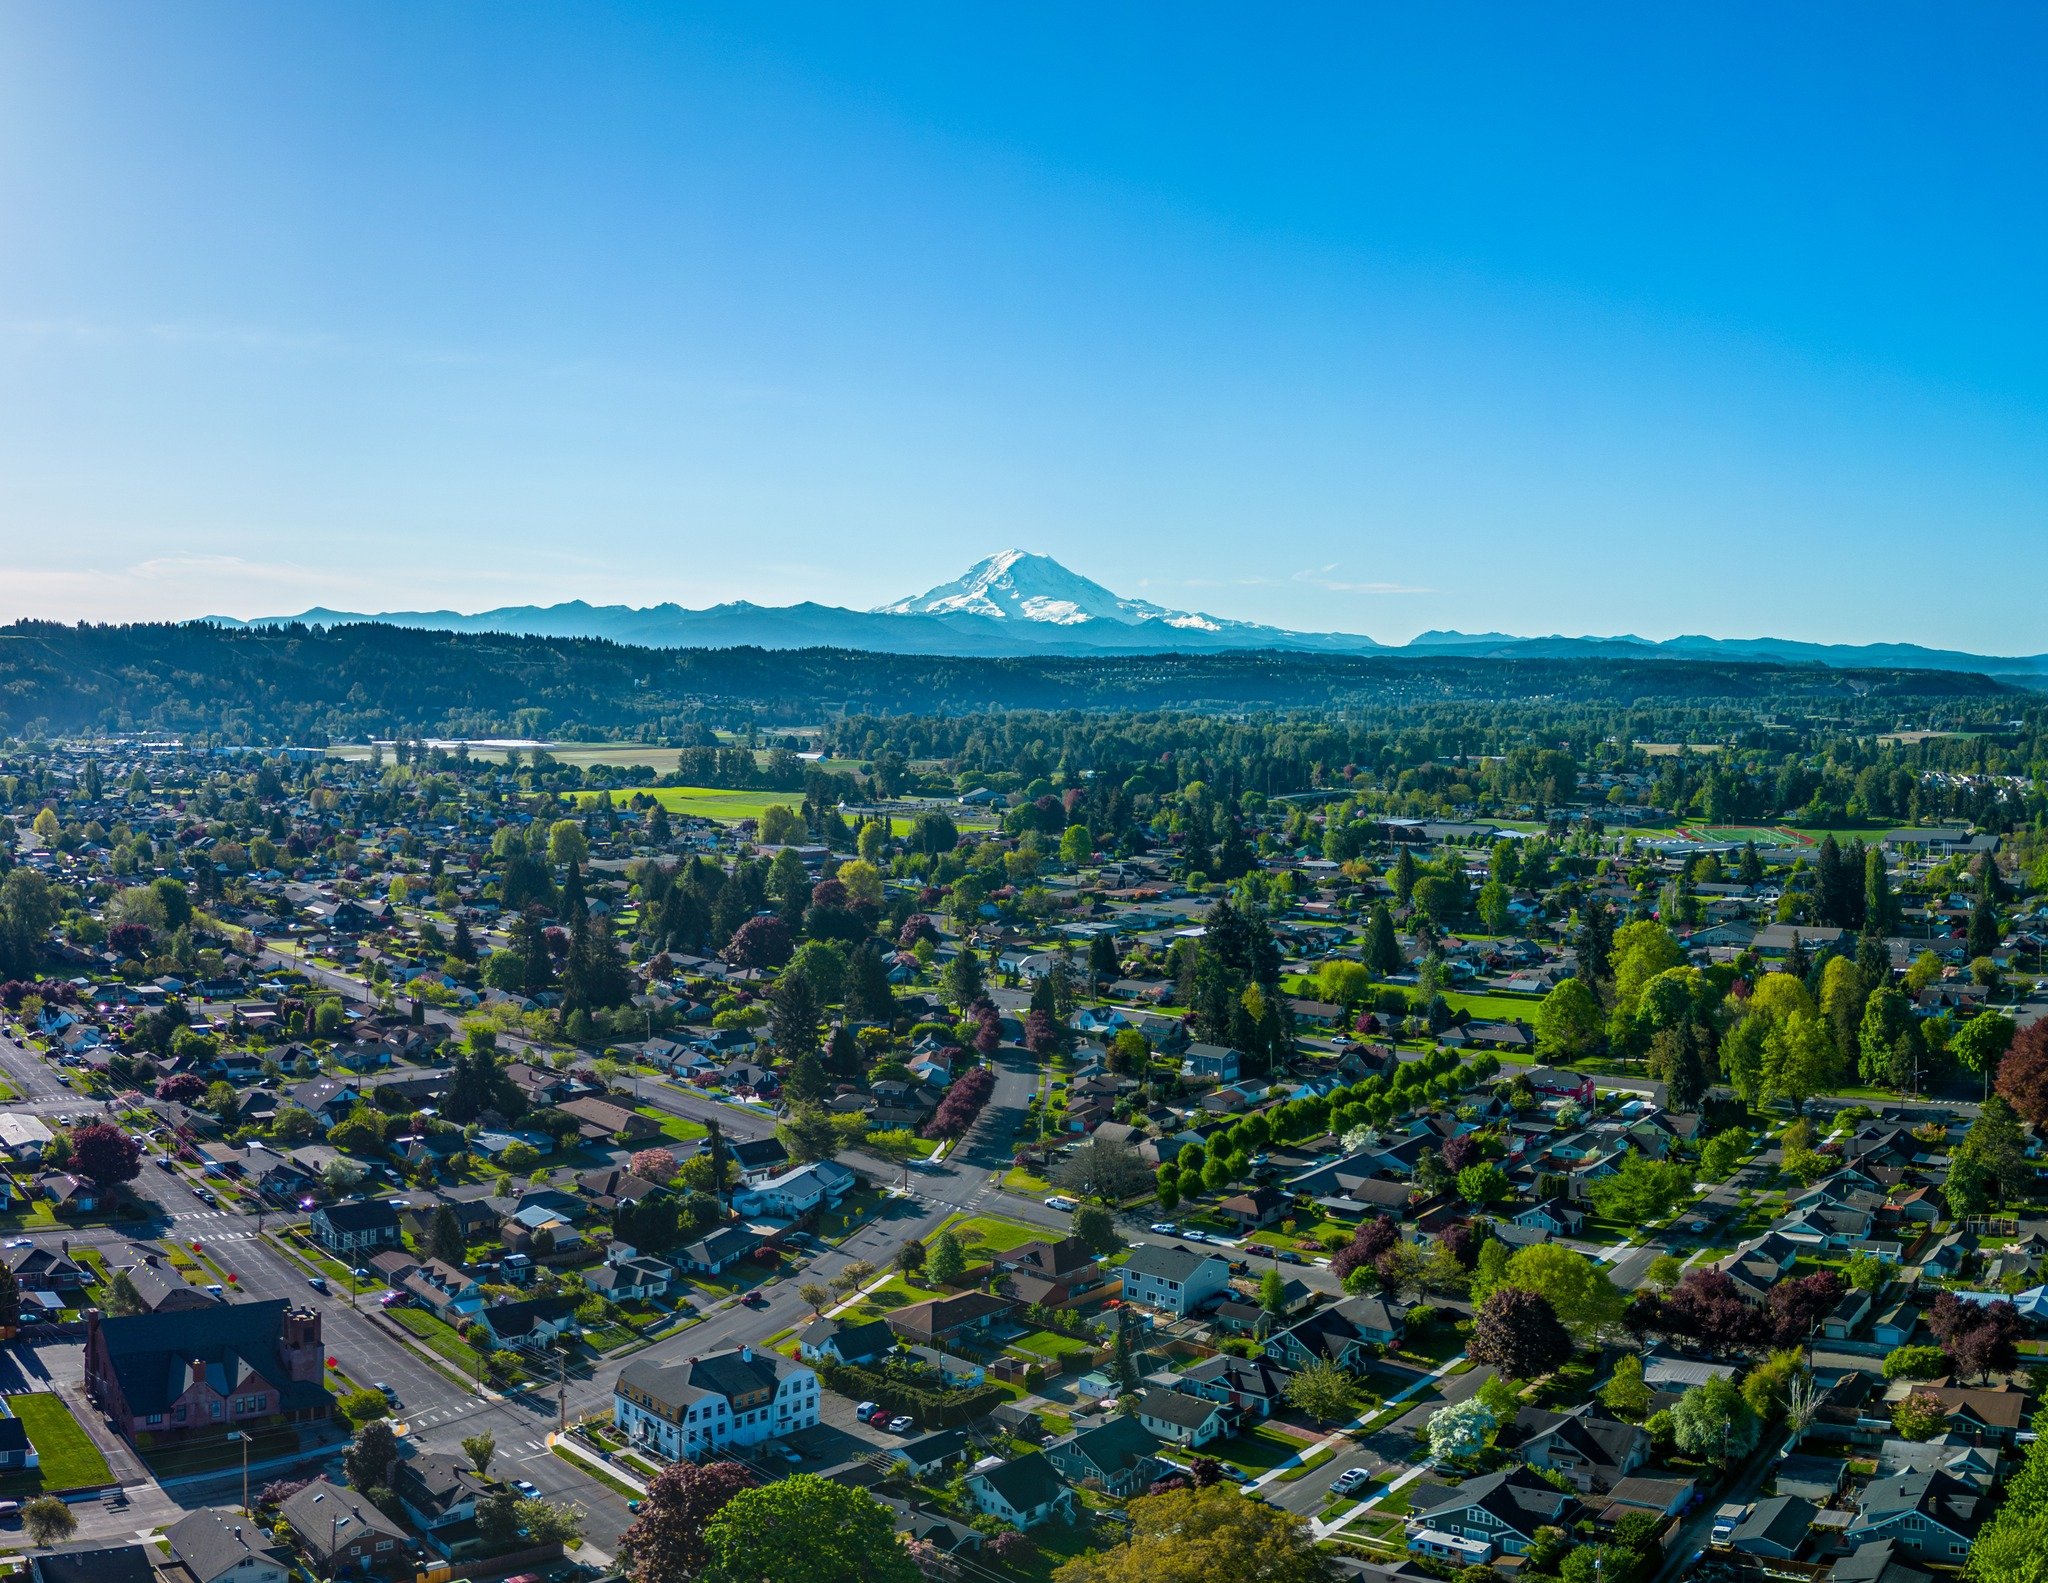 We only get one, take care of it 🌎 #EarthDay 

#moyerproductionco #photography #photographer #mtrainier #lifestylephotography #scenicphotography #drone #dronephotographer #dronephotography #dronework #dronecertified #pnwphotography #happyearthday #l